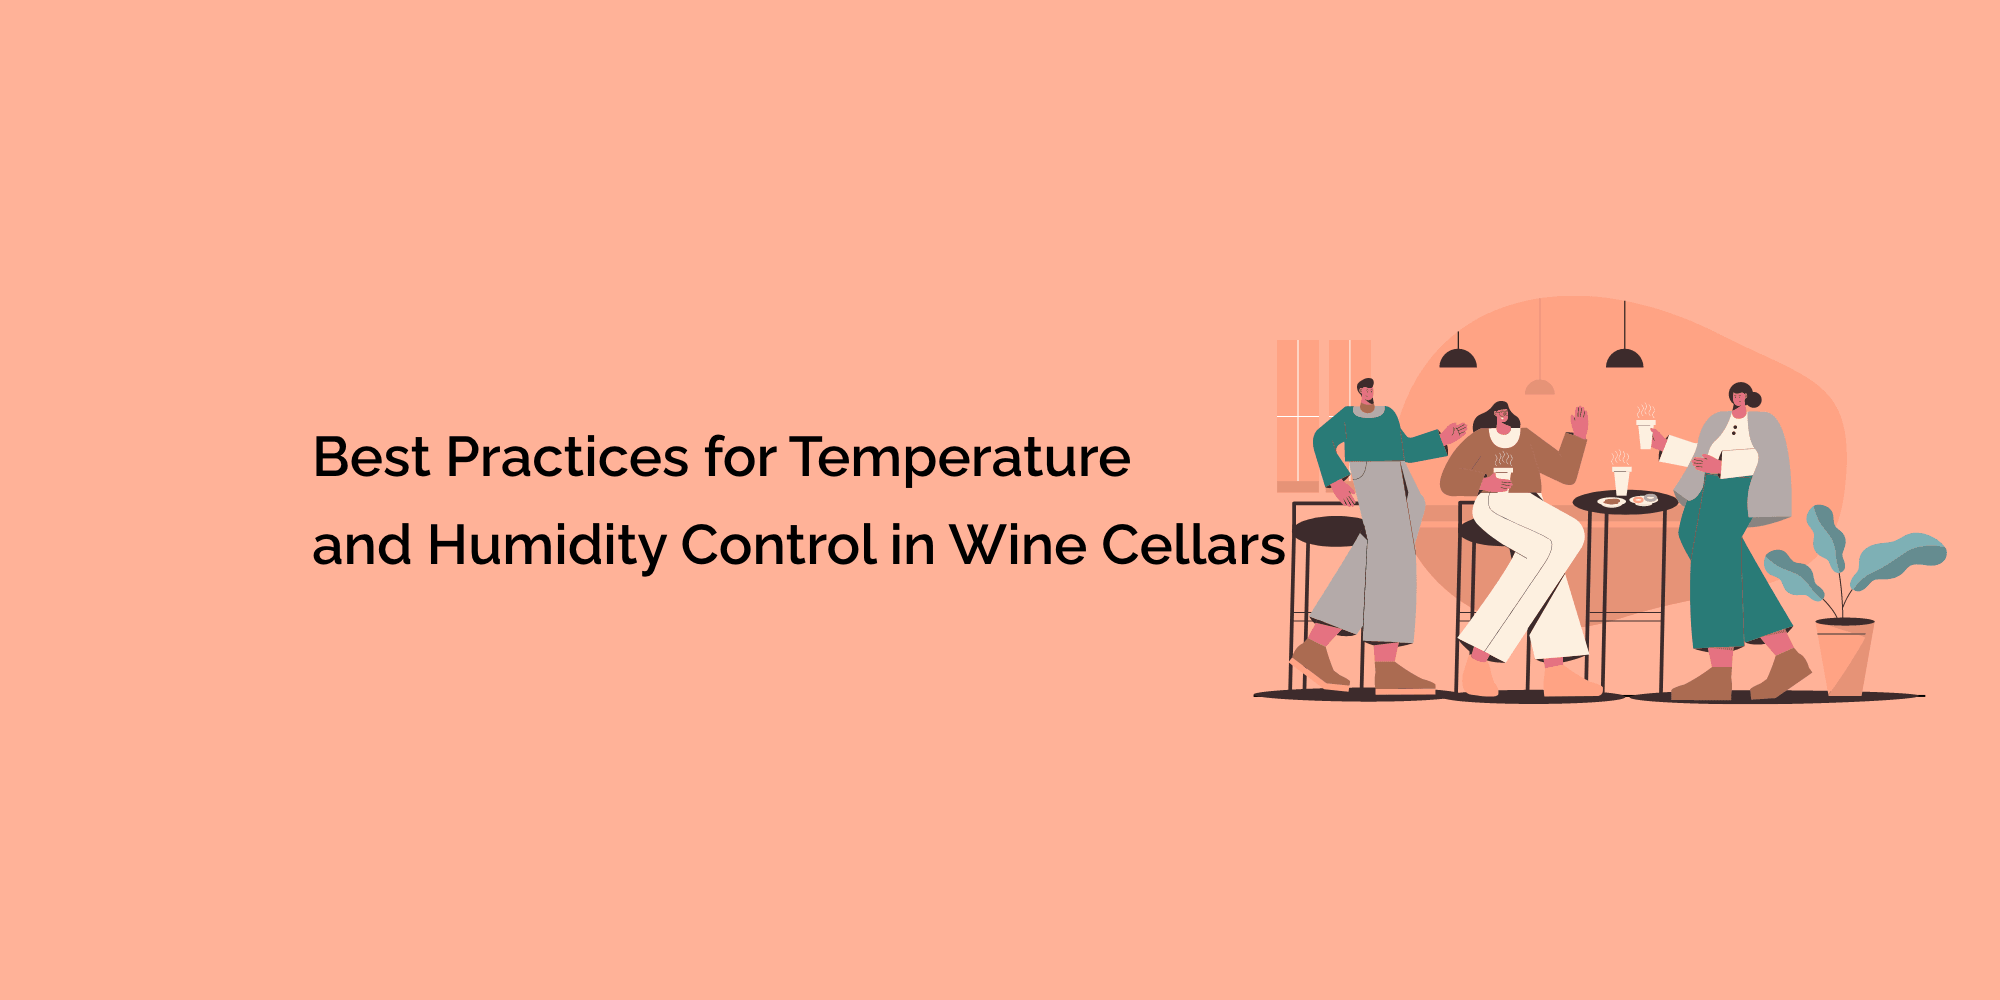 Best Practices for Temperature and Humidity Control in Wine Cellars